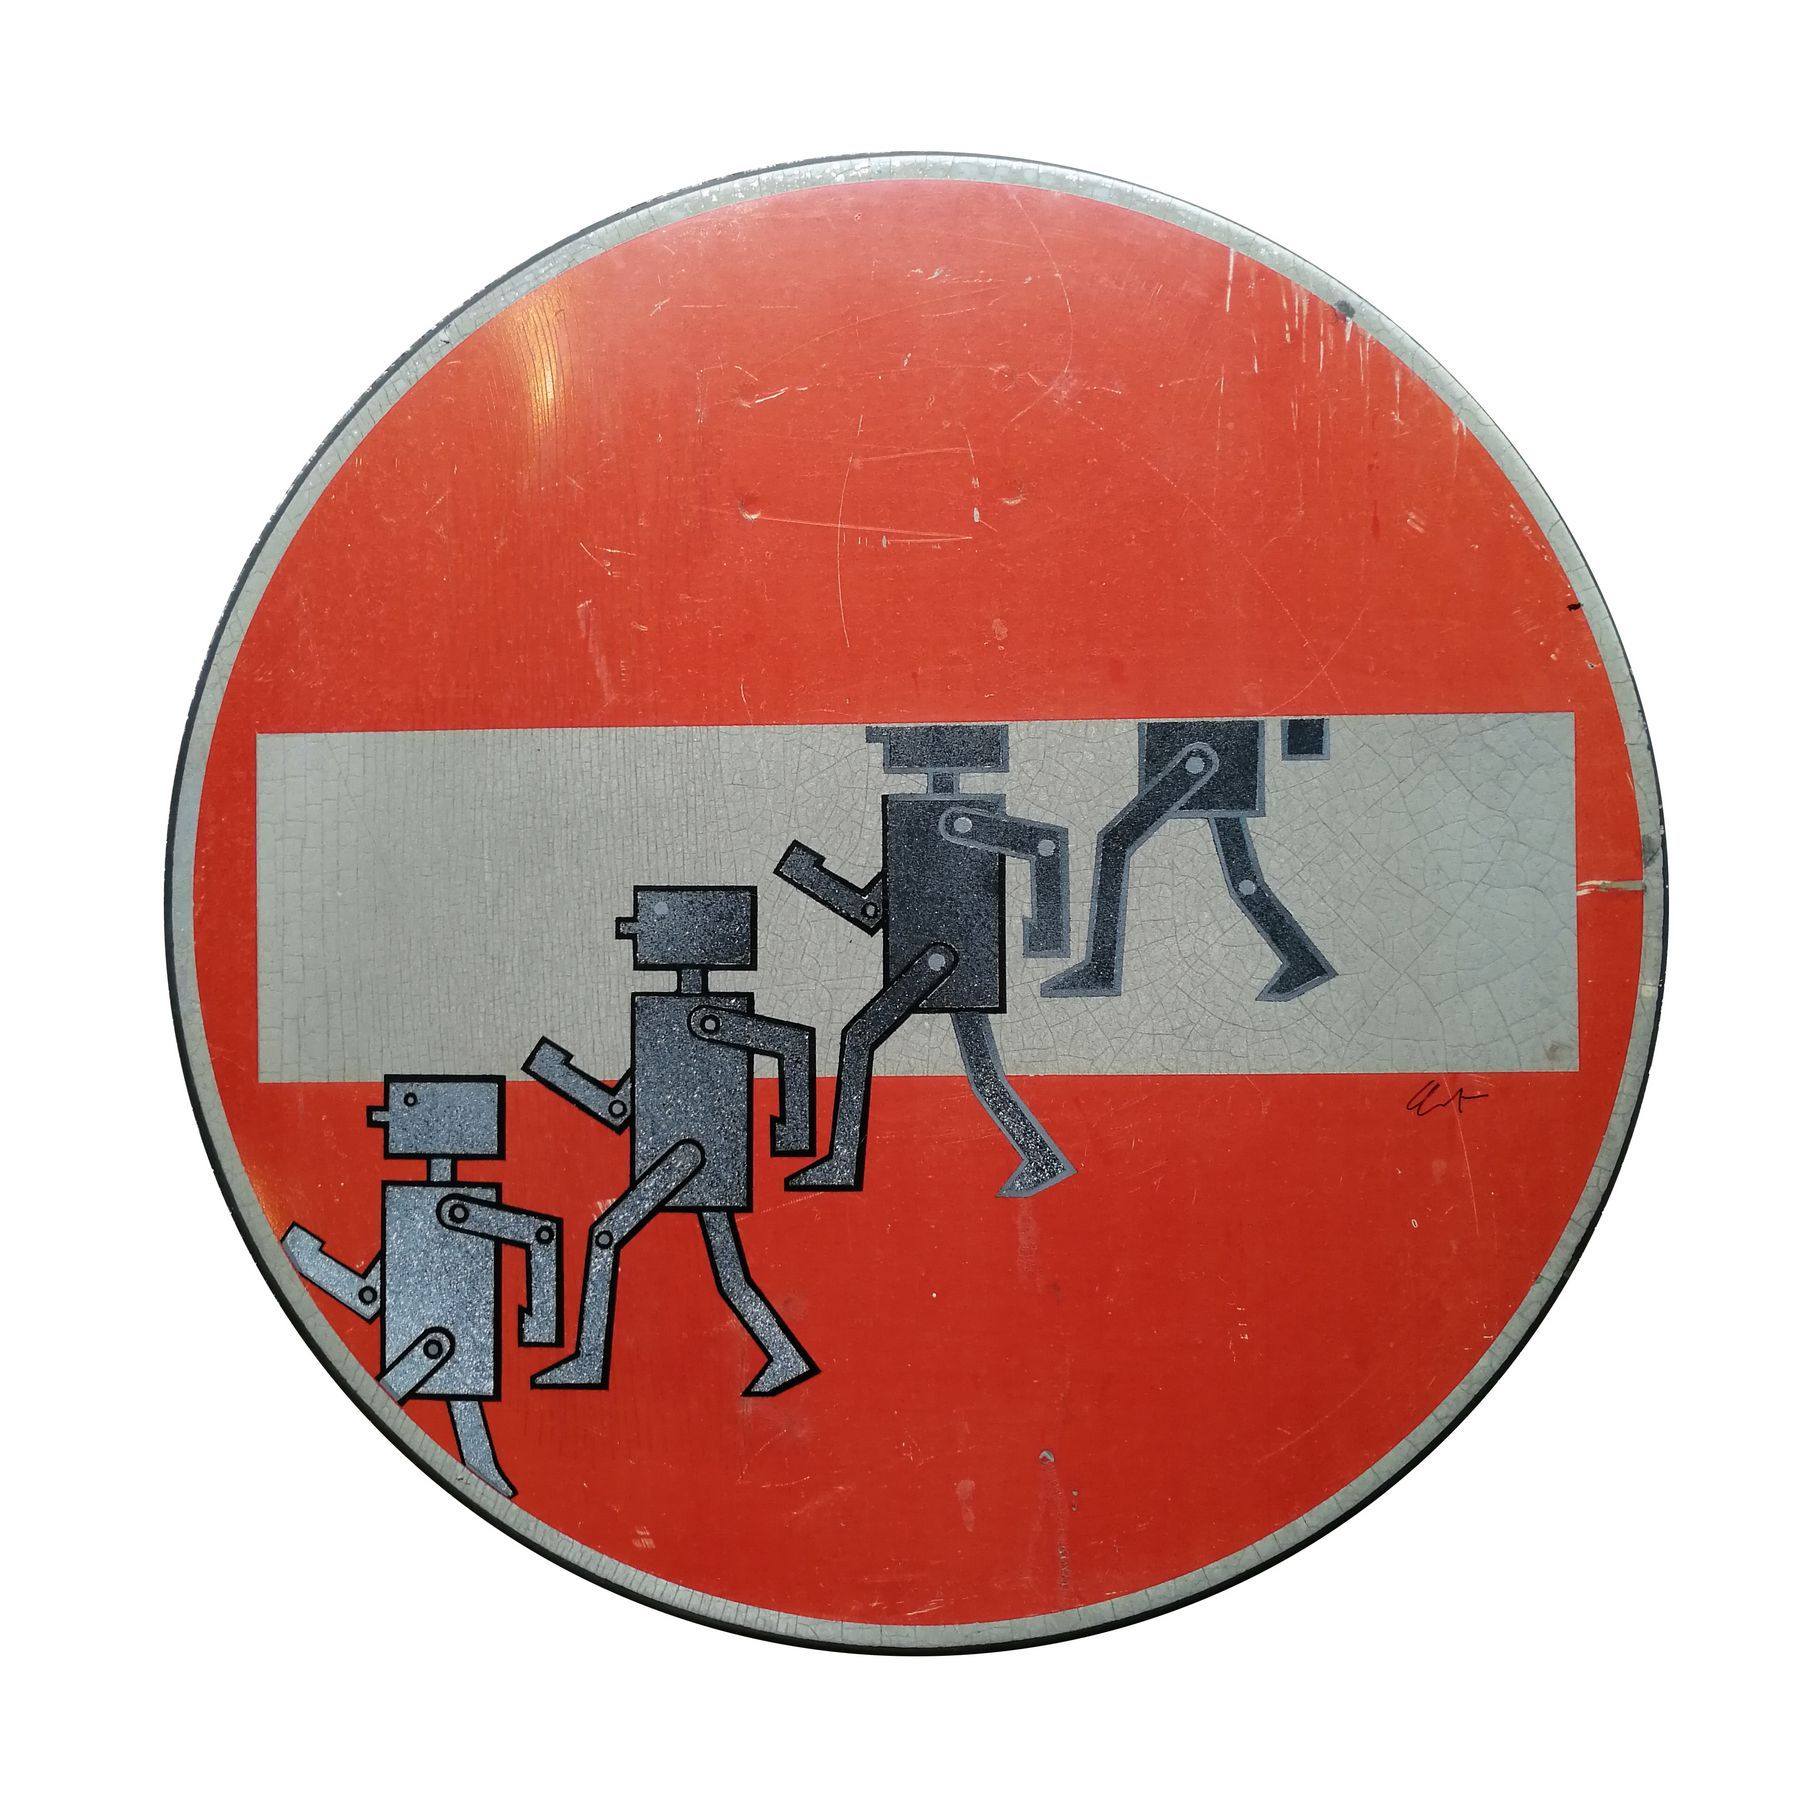 Null CLET Robot, 2019

Spray paint on a 1988 road sign. This is a special piece &hellip;